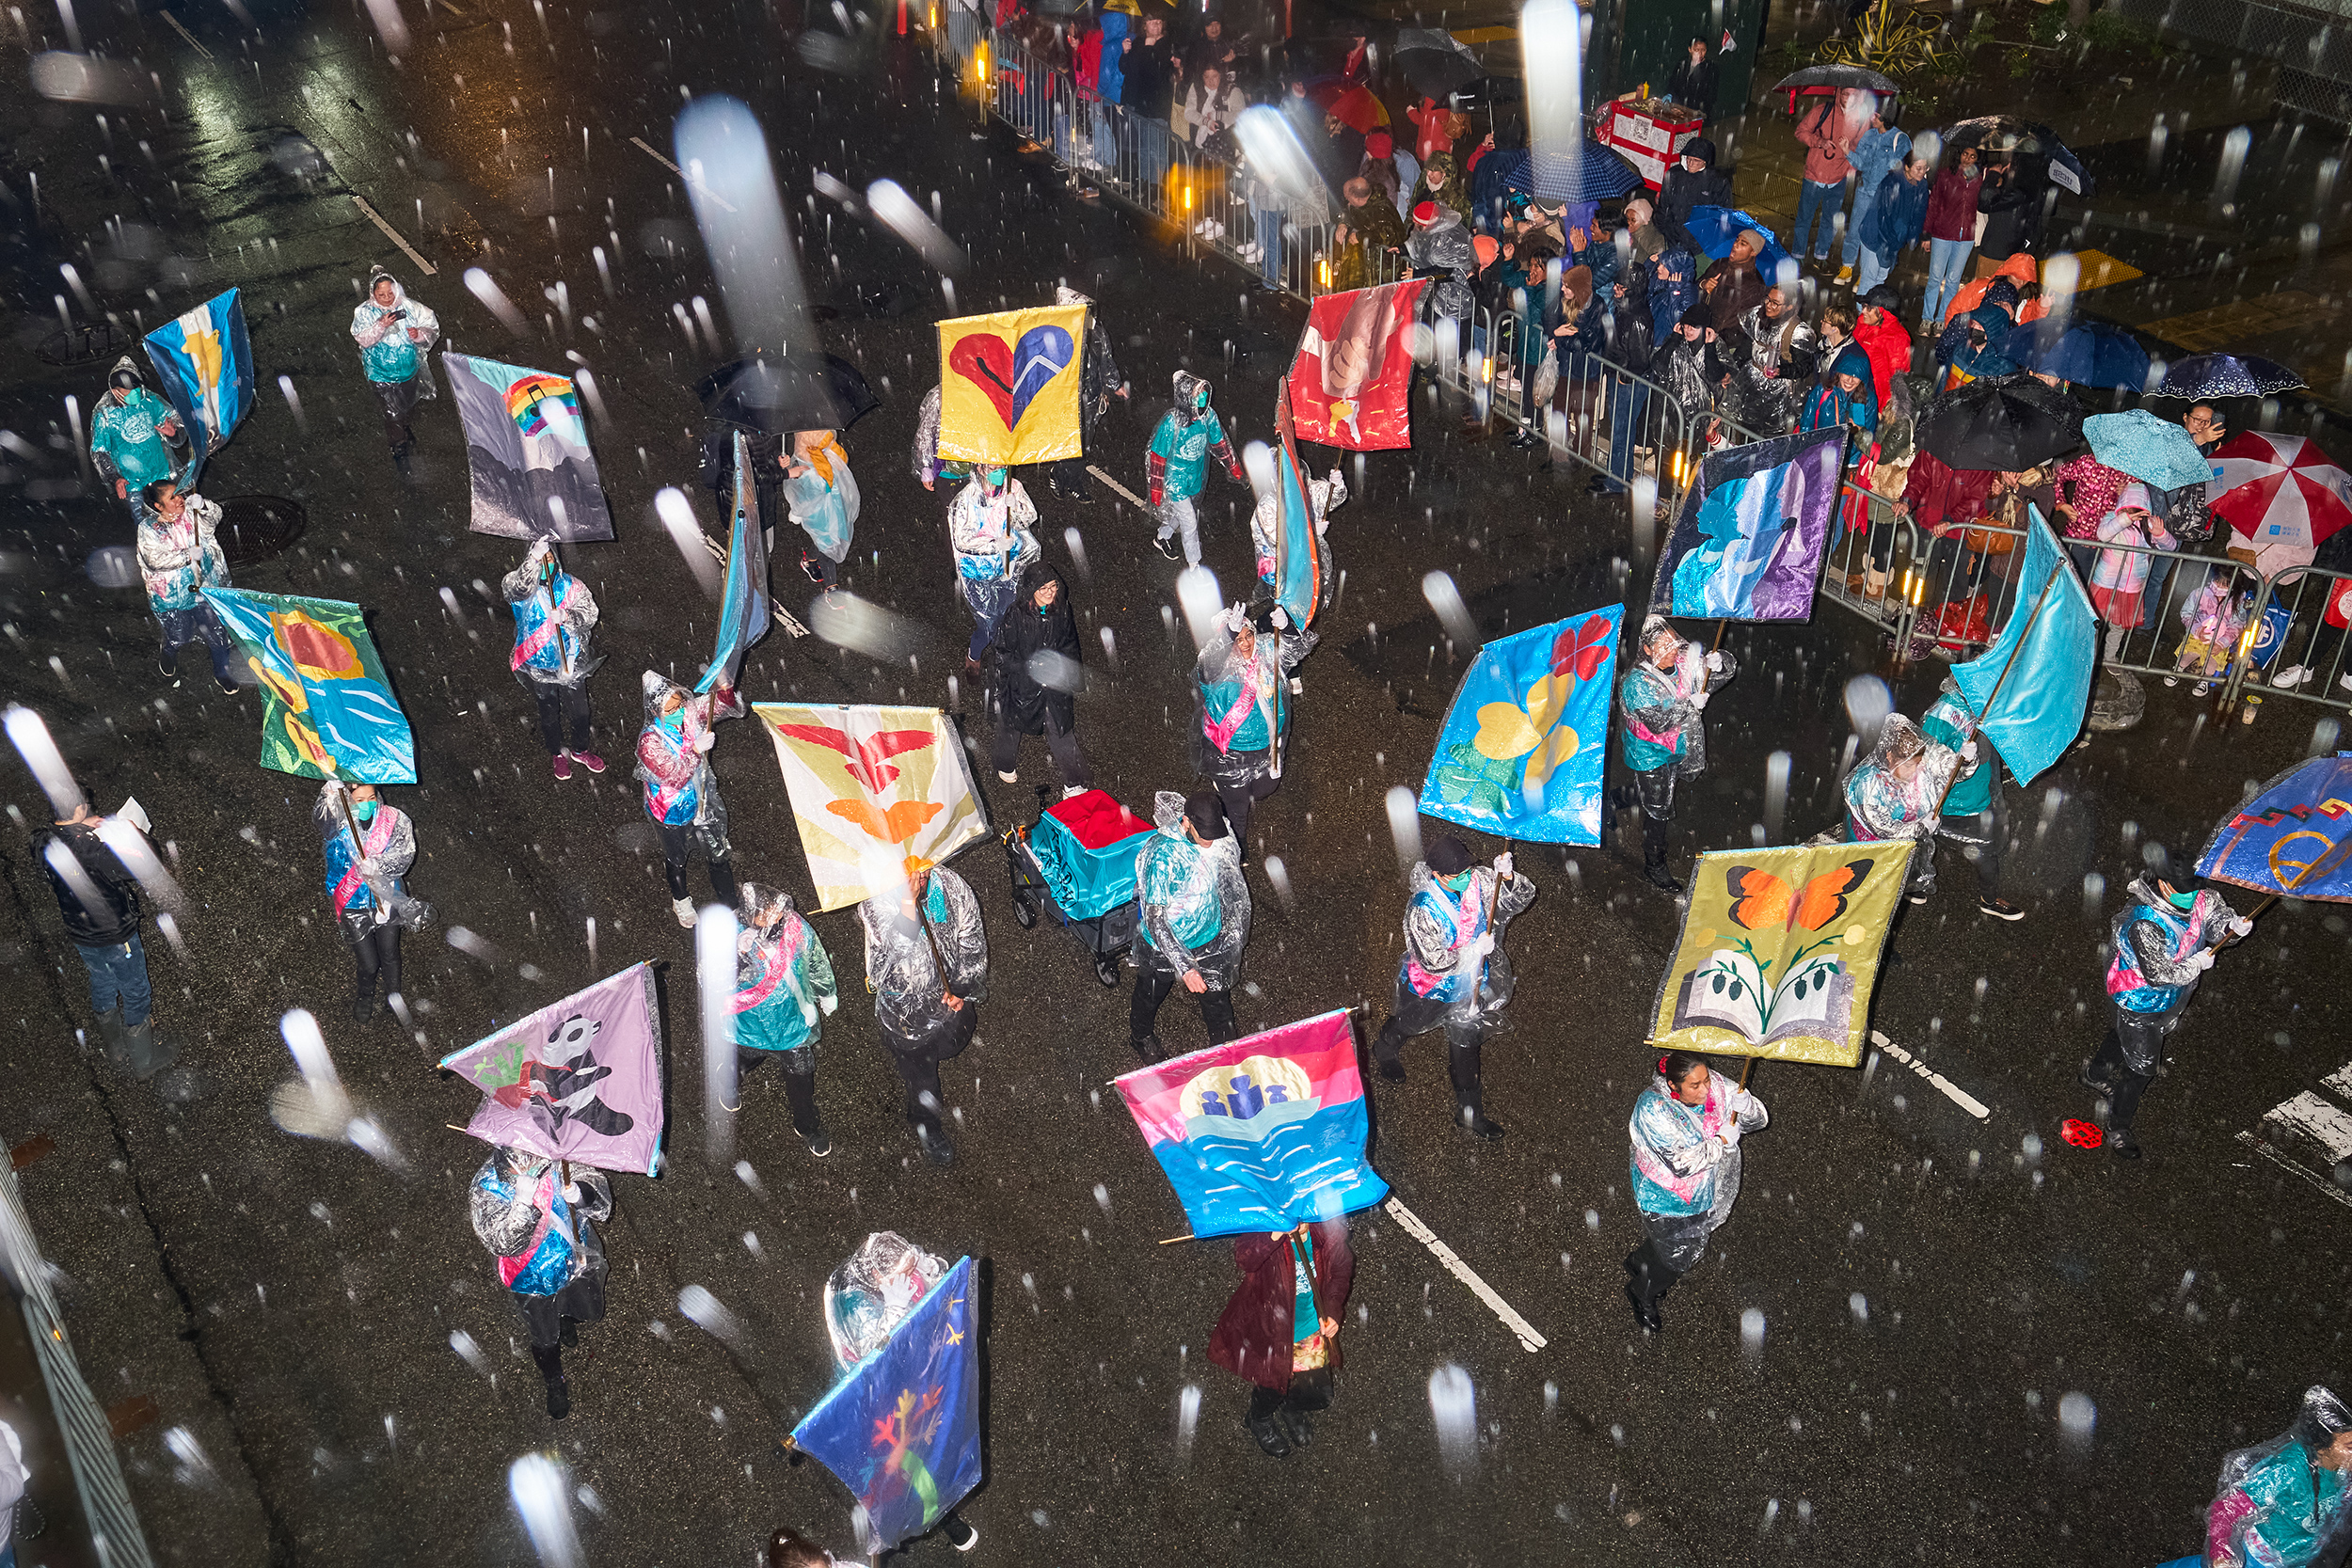 Aerial image of people holding colorful banners in a parade 